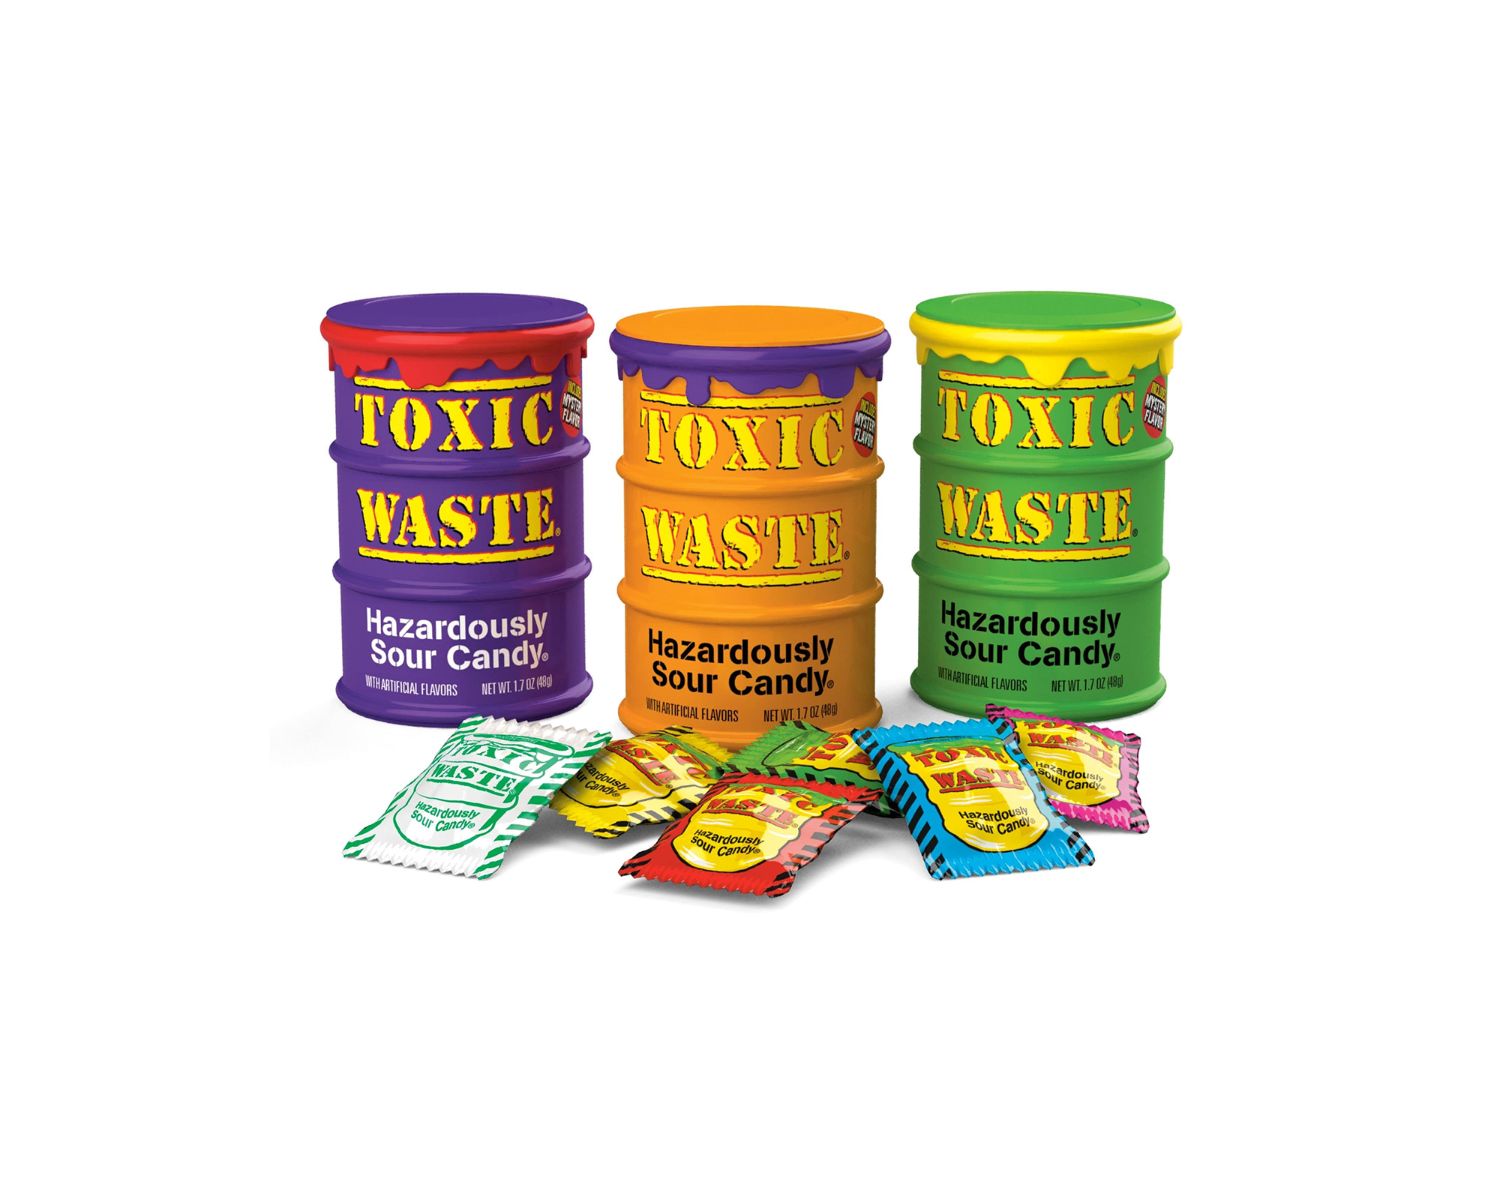 12-astonishing-facts-about-toxic-waste-candy